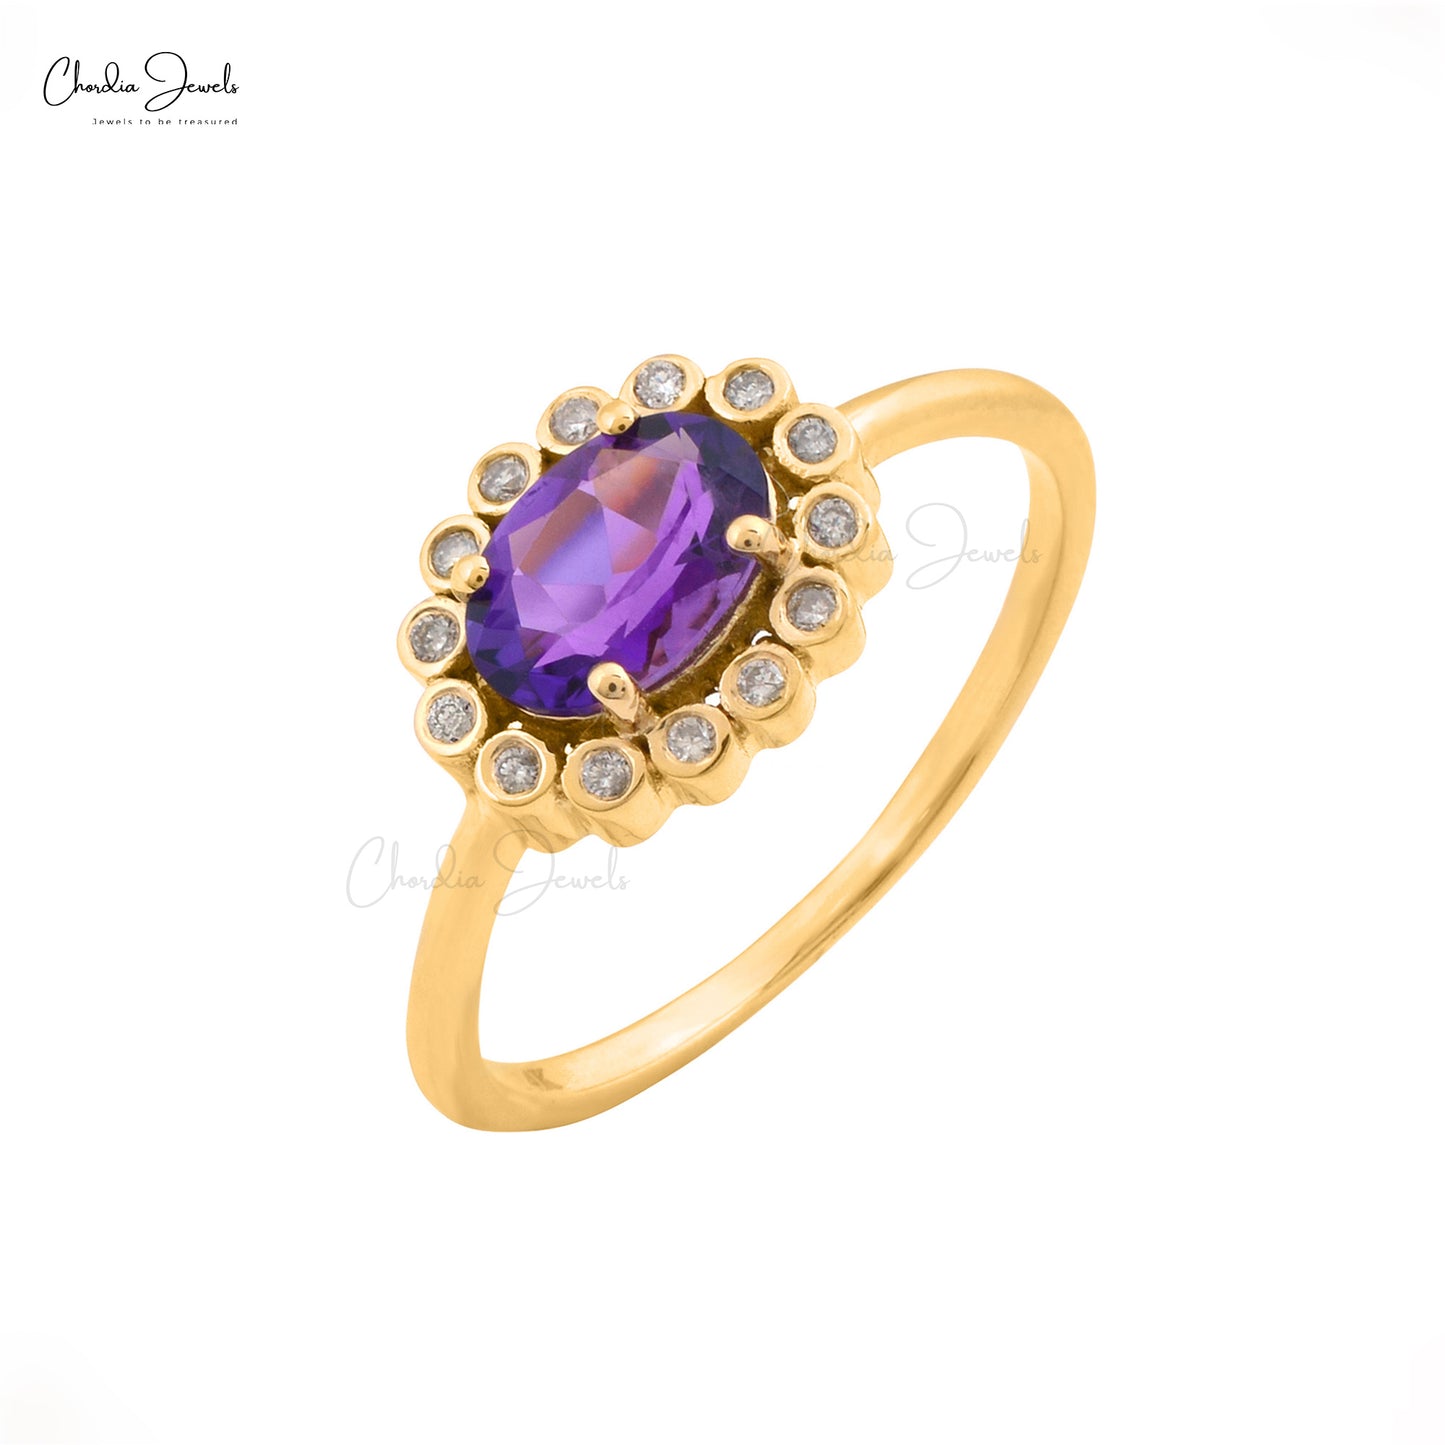 Stunning 14k Real Gold Promise Ring Genuine 0.72CT Amethyst with Diamond Halo Dainty Ring